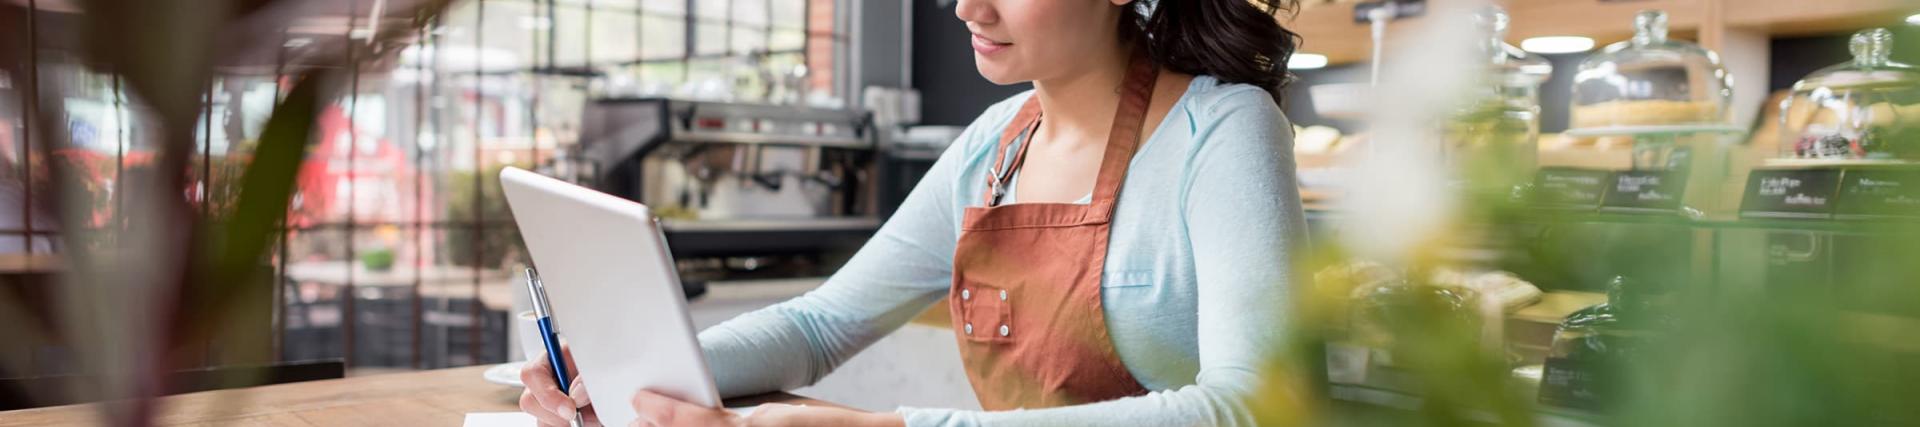 A female woman wearing an apron looking at a tablet and notes in a coffee shop